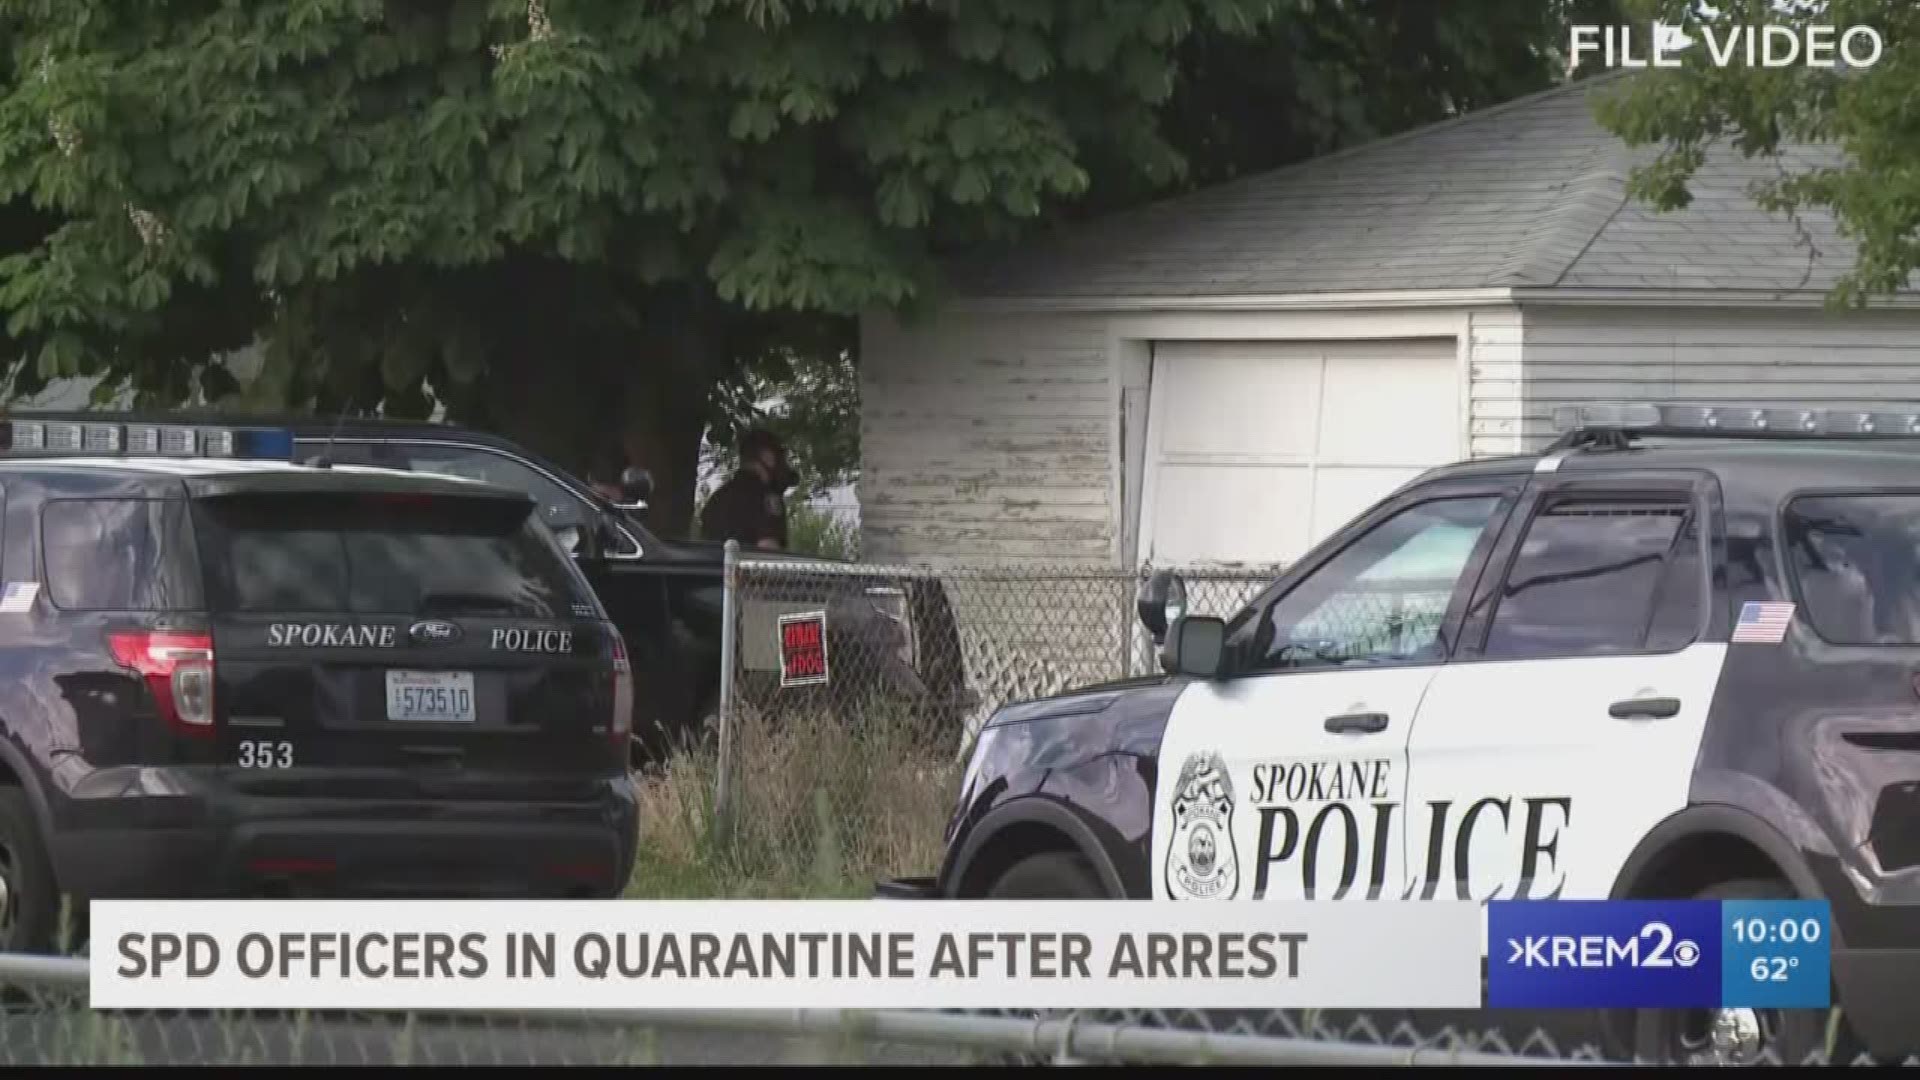 The man told Spokane police officers on Monday that he had tested positive for coronavirus and was supposed to be in quarantine until the end of this week.